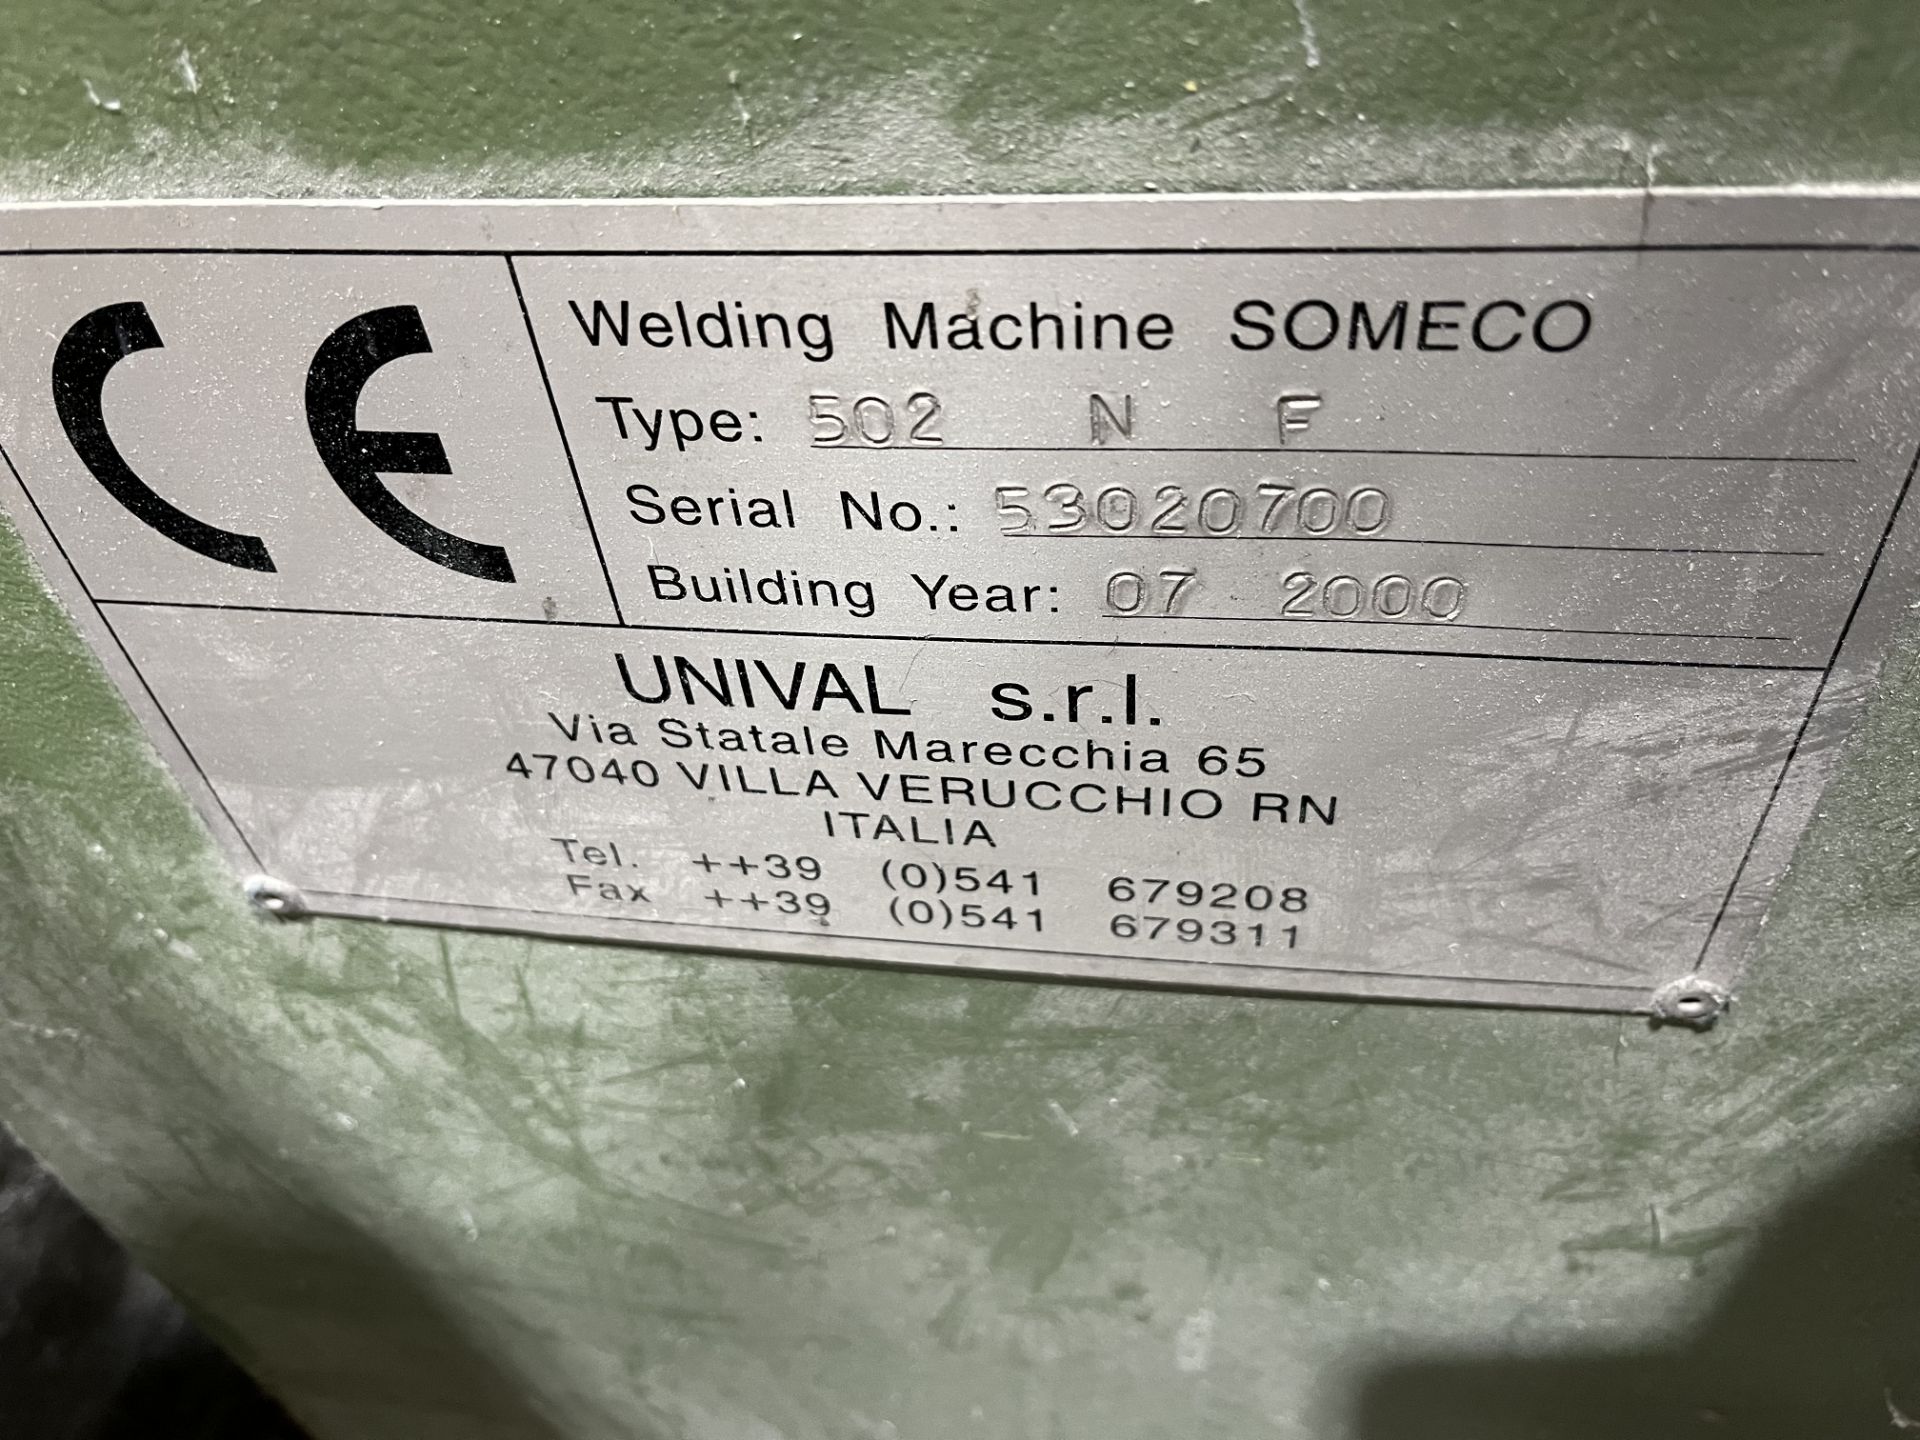 Someco 502NF Twin Head Welder Serial No. 53020700 (2000) - Image 2 of 2